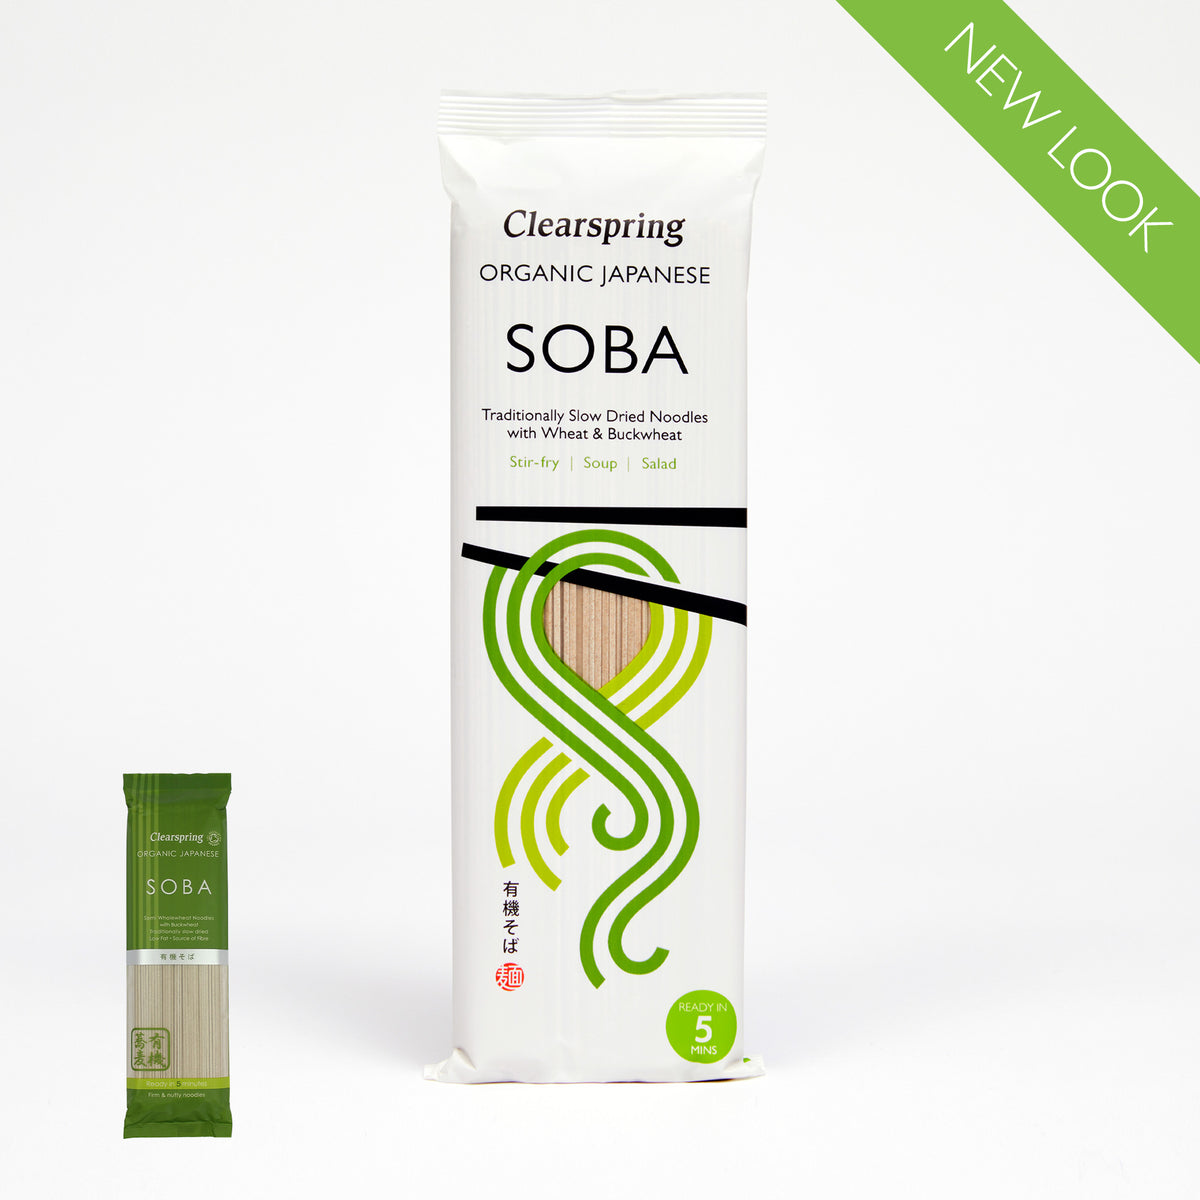 Clearspring Organic Japanese Soba Noodles